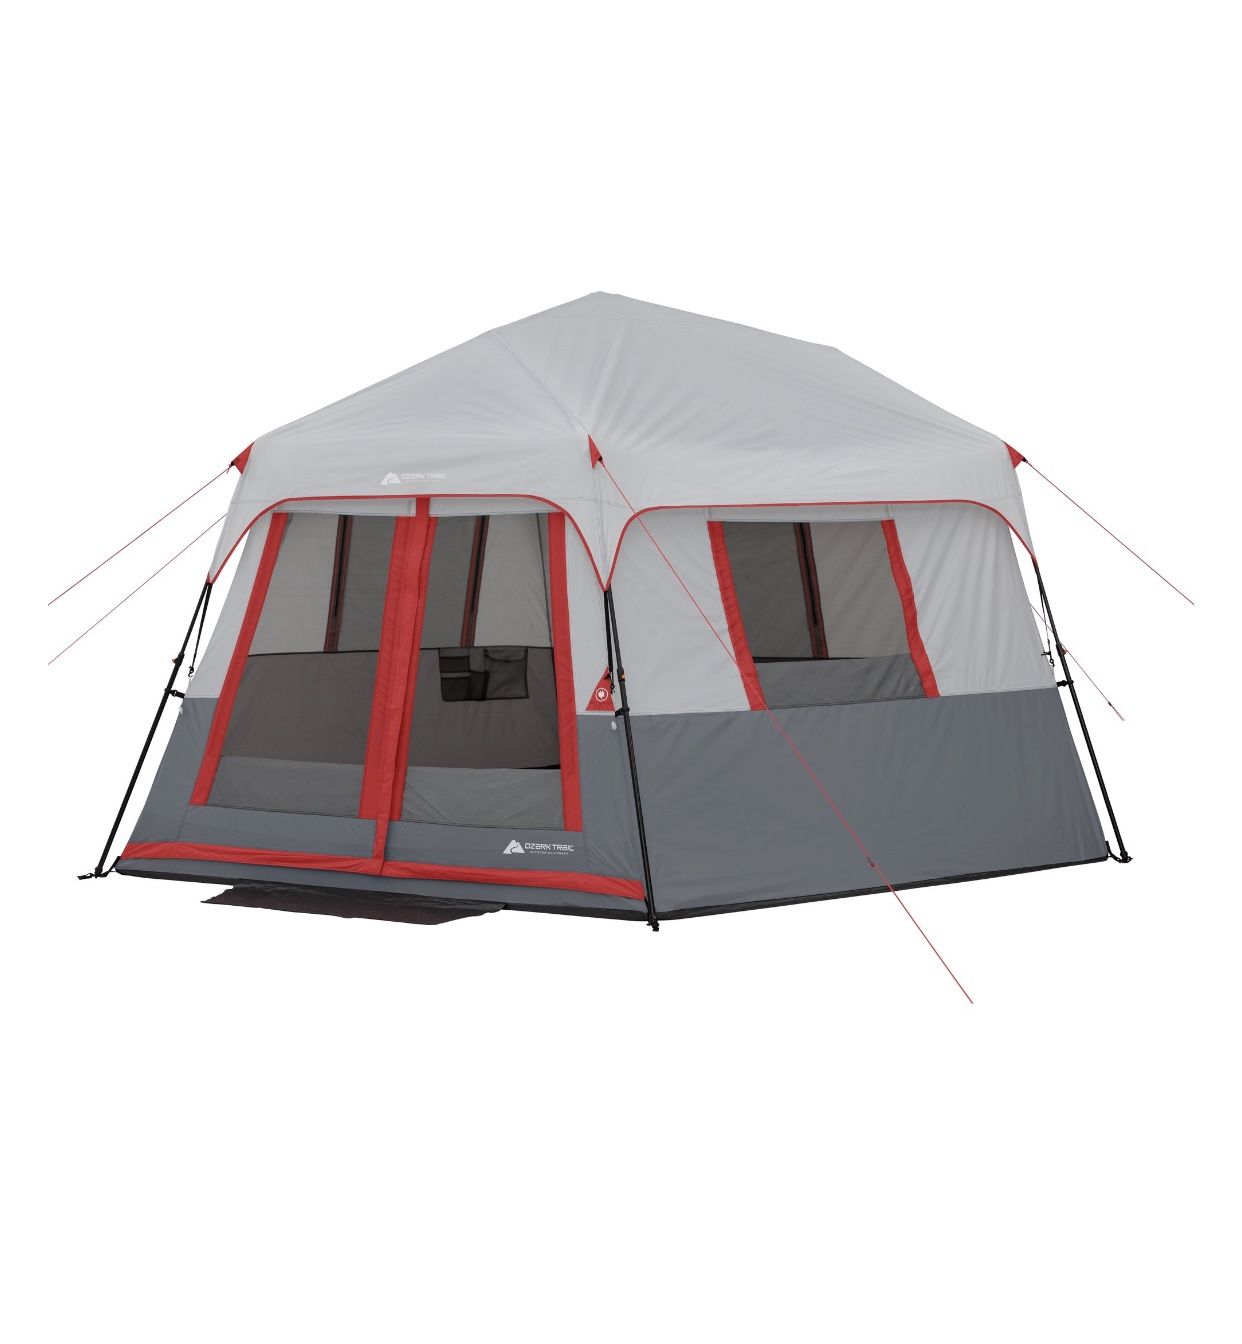 8 Person Camping tent